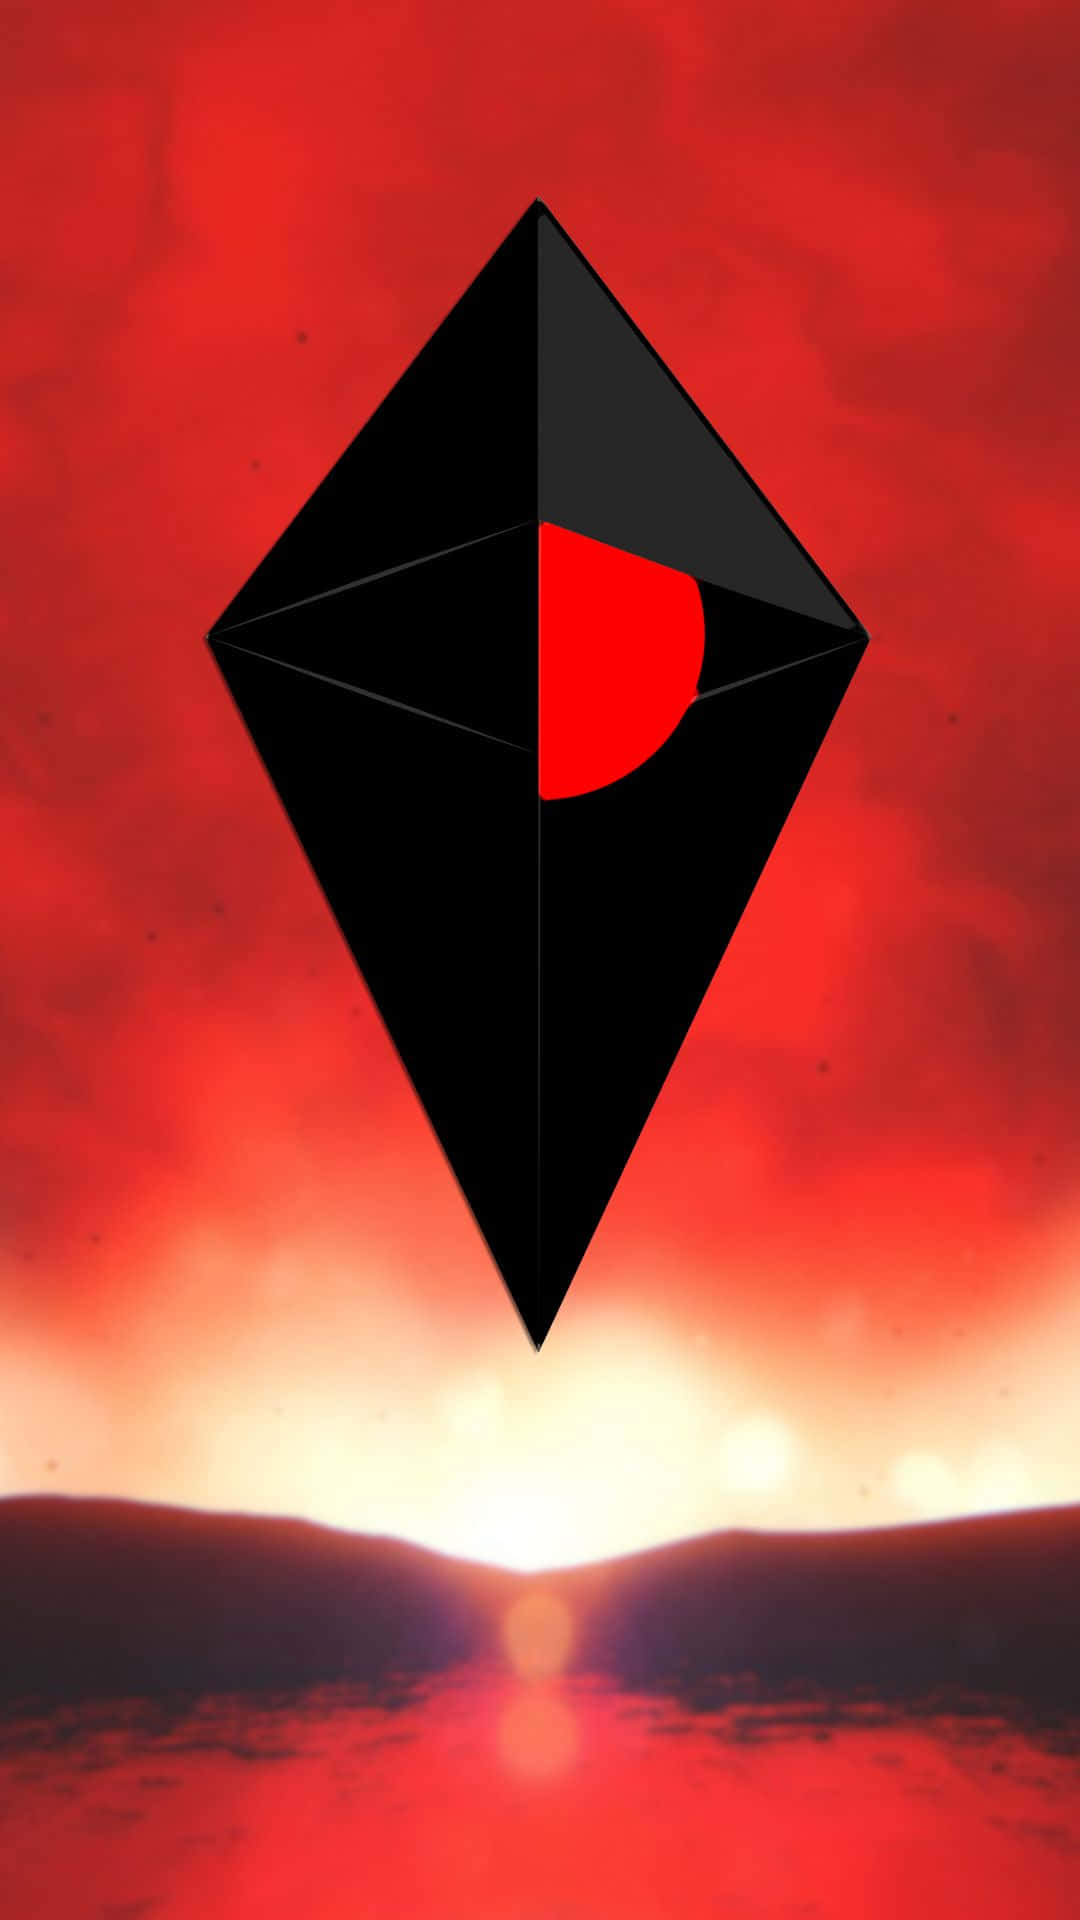 A Red And Black Diamond With A Sun In The Background Wallpaper